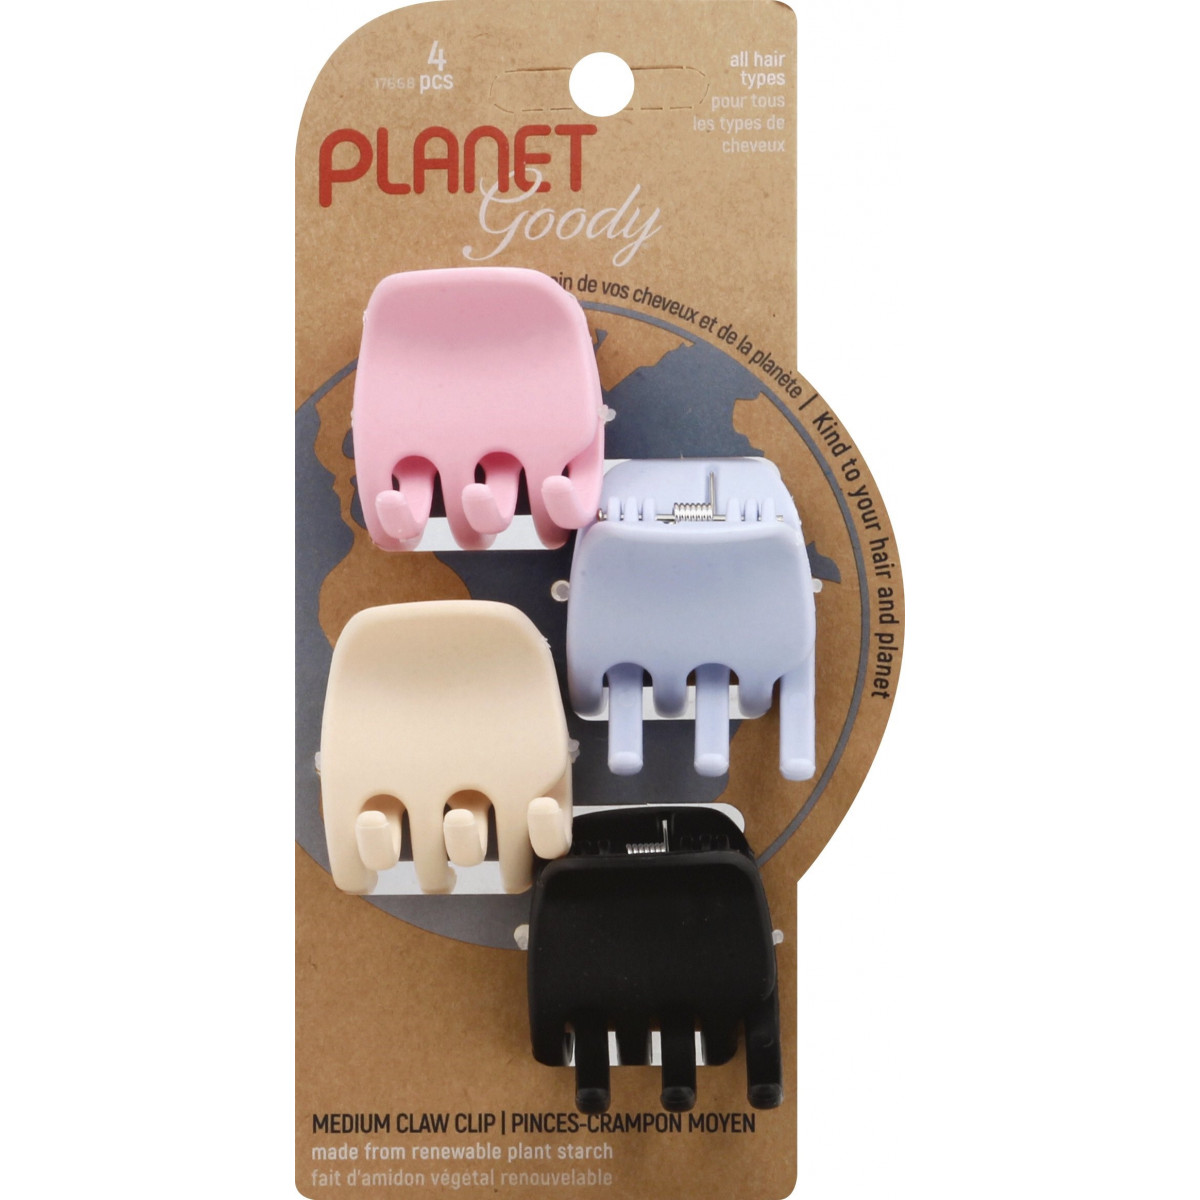 Planet Goody Neutral Heritage Claw Clips, 4 CT UPC:041457176689 Pack:72/3